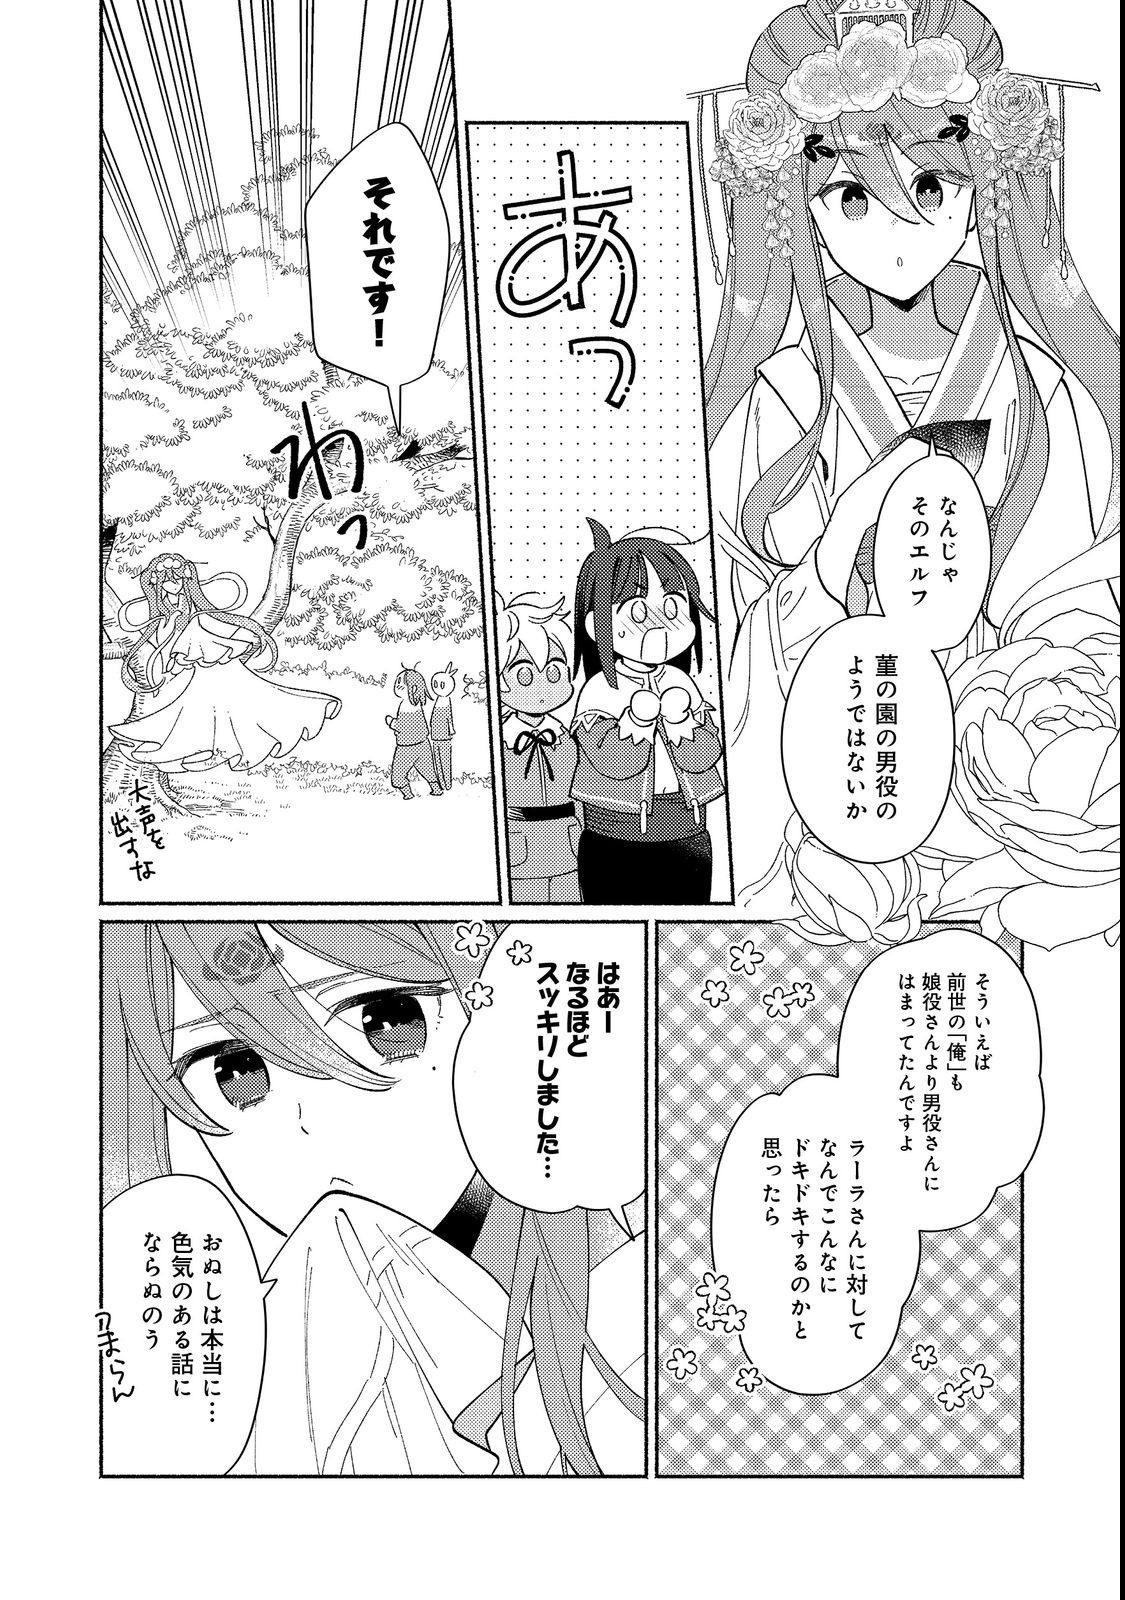 I’m the White Pig Nobleman 第17.2話 - Page 5